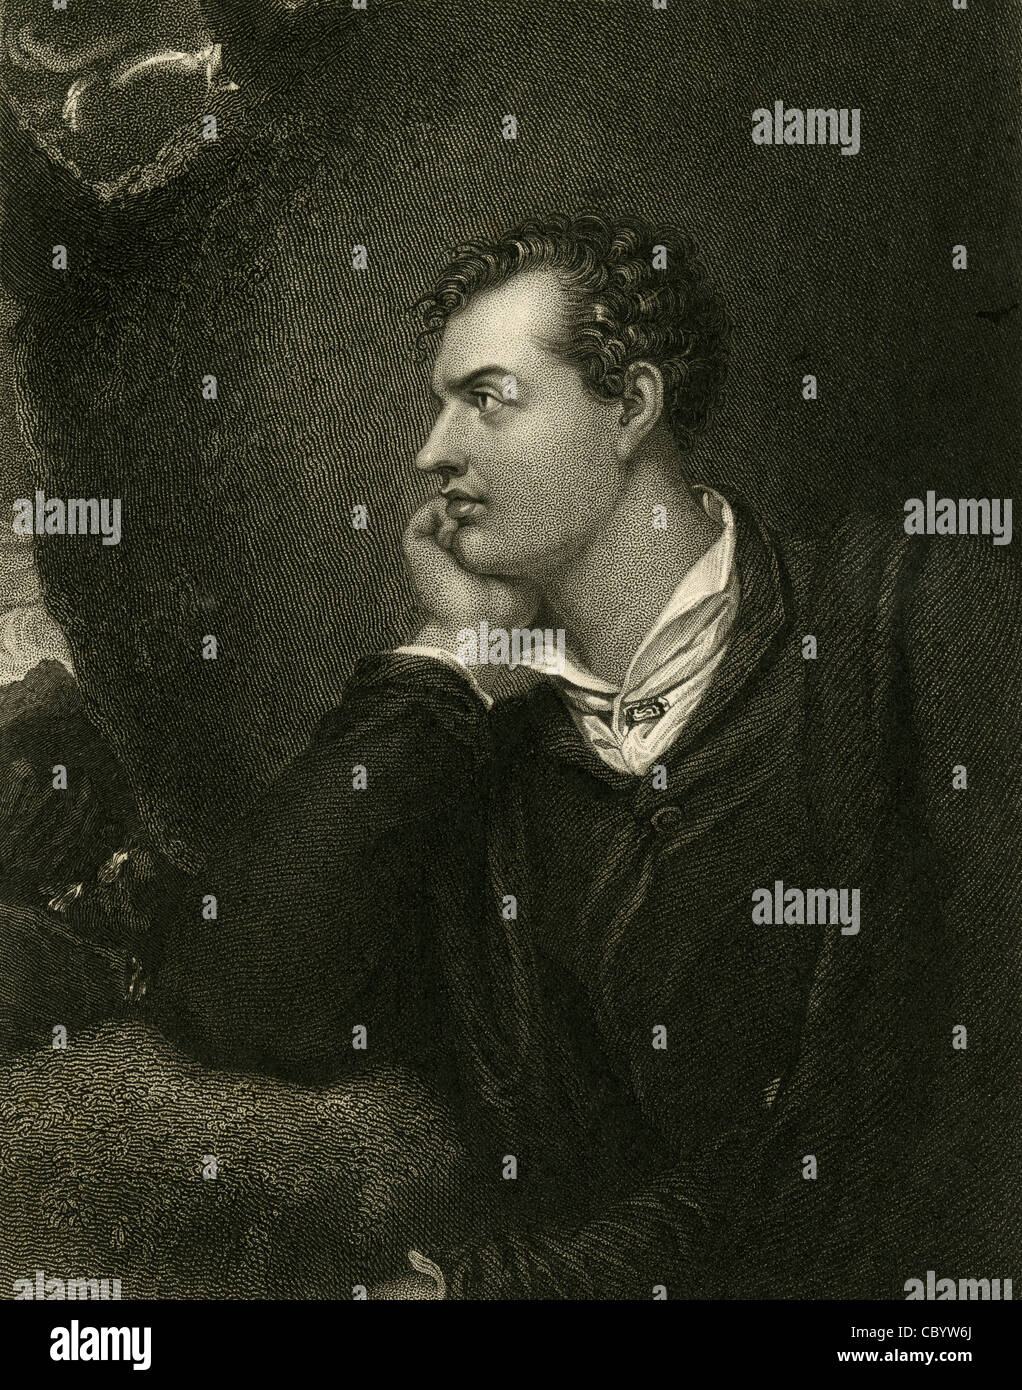 1829 engraving of Lord Byron. Stock Photo